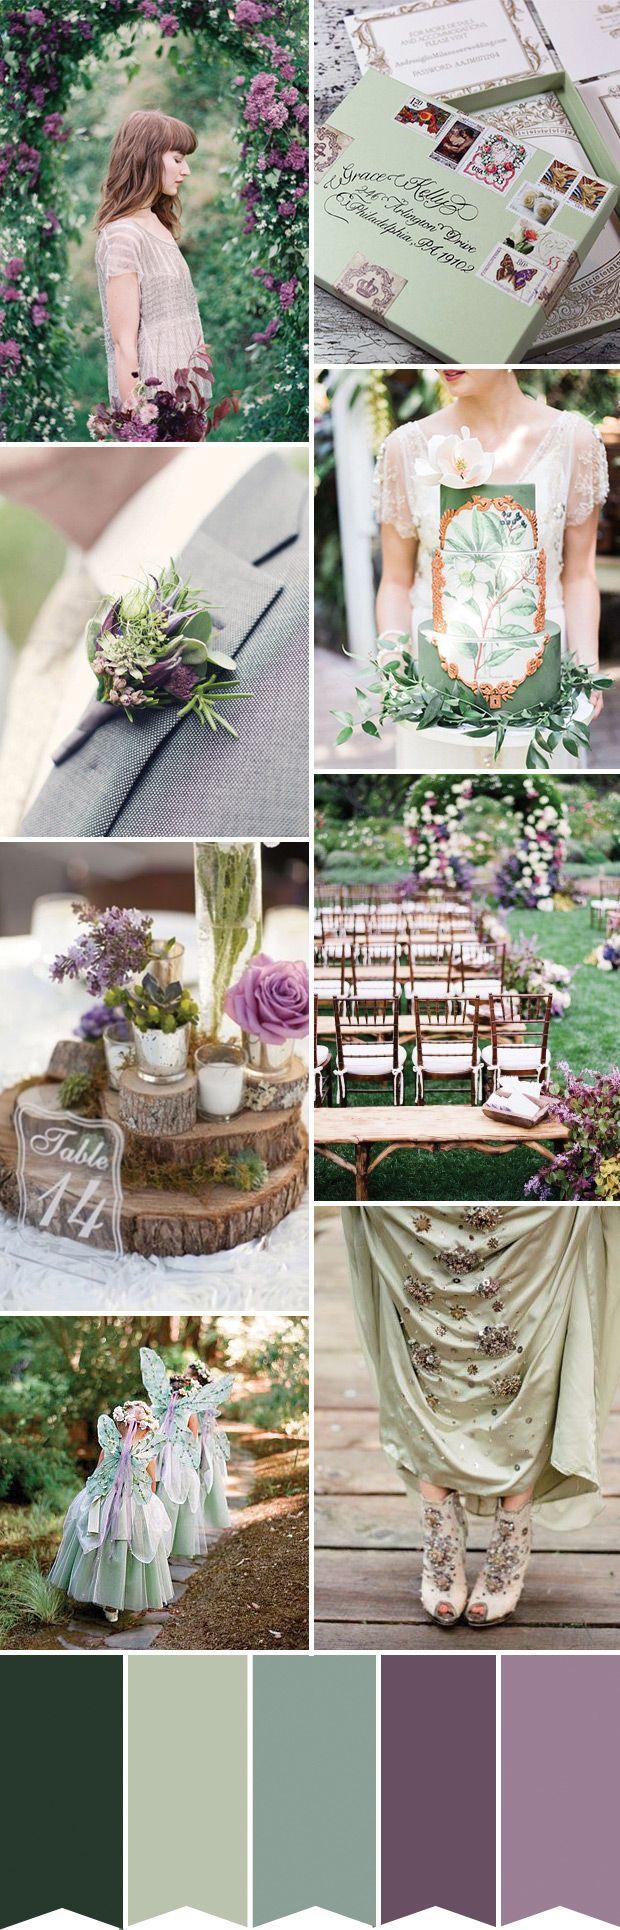 Hochzeit - Happily Ever After - Fairytale Purple And Green Wedding Inspiration